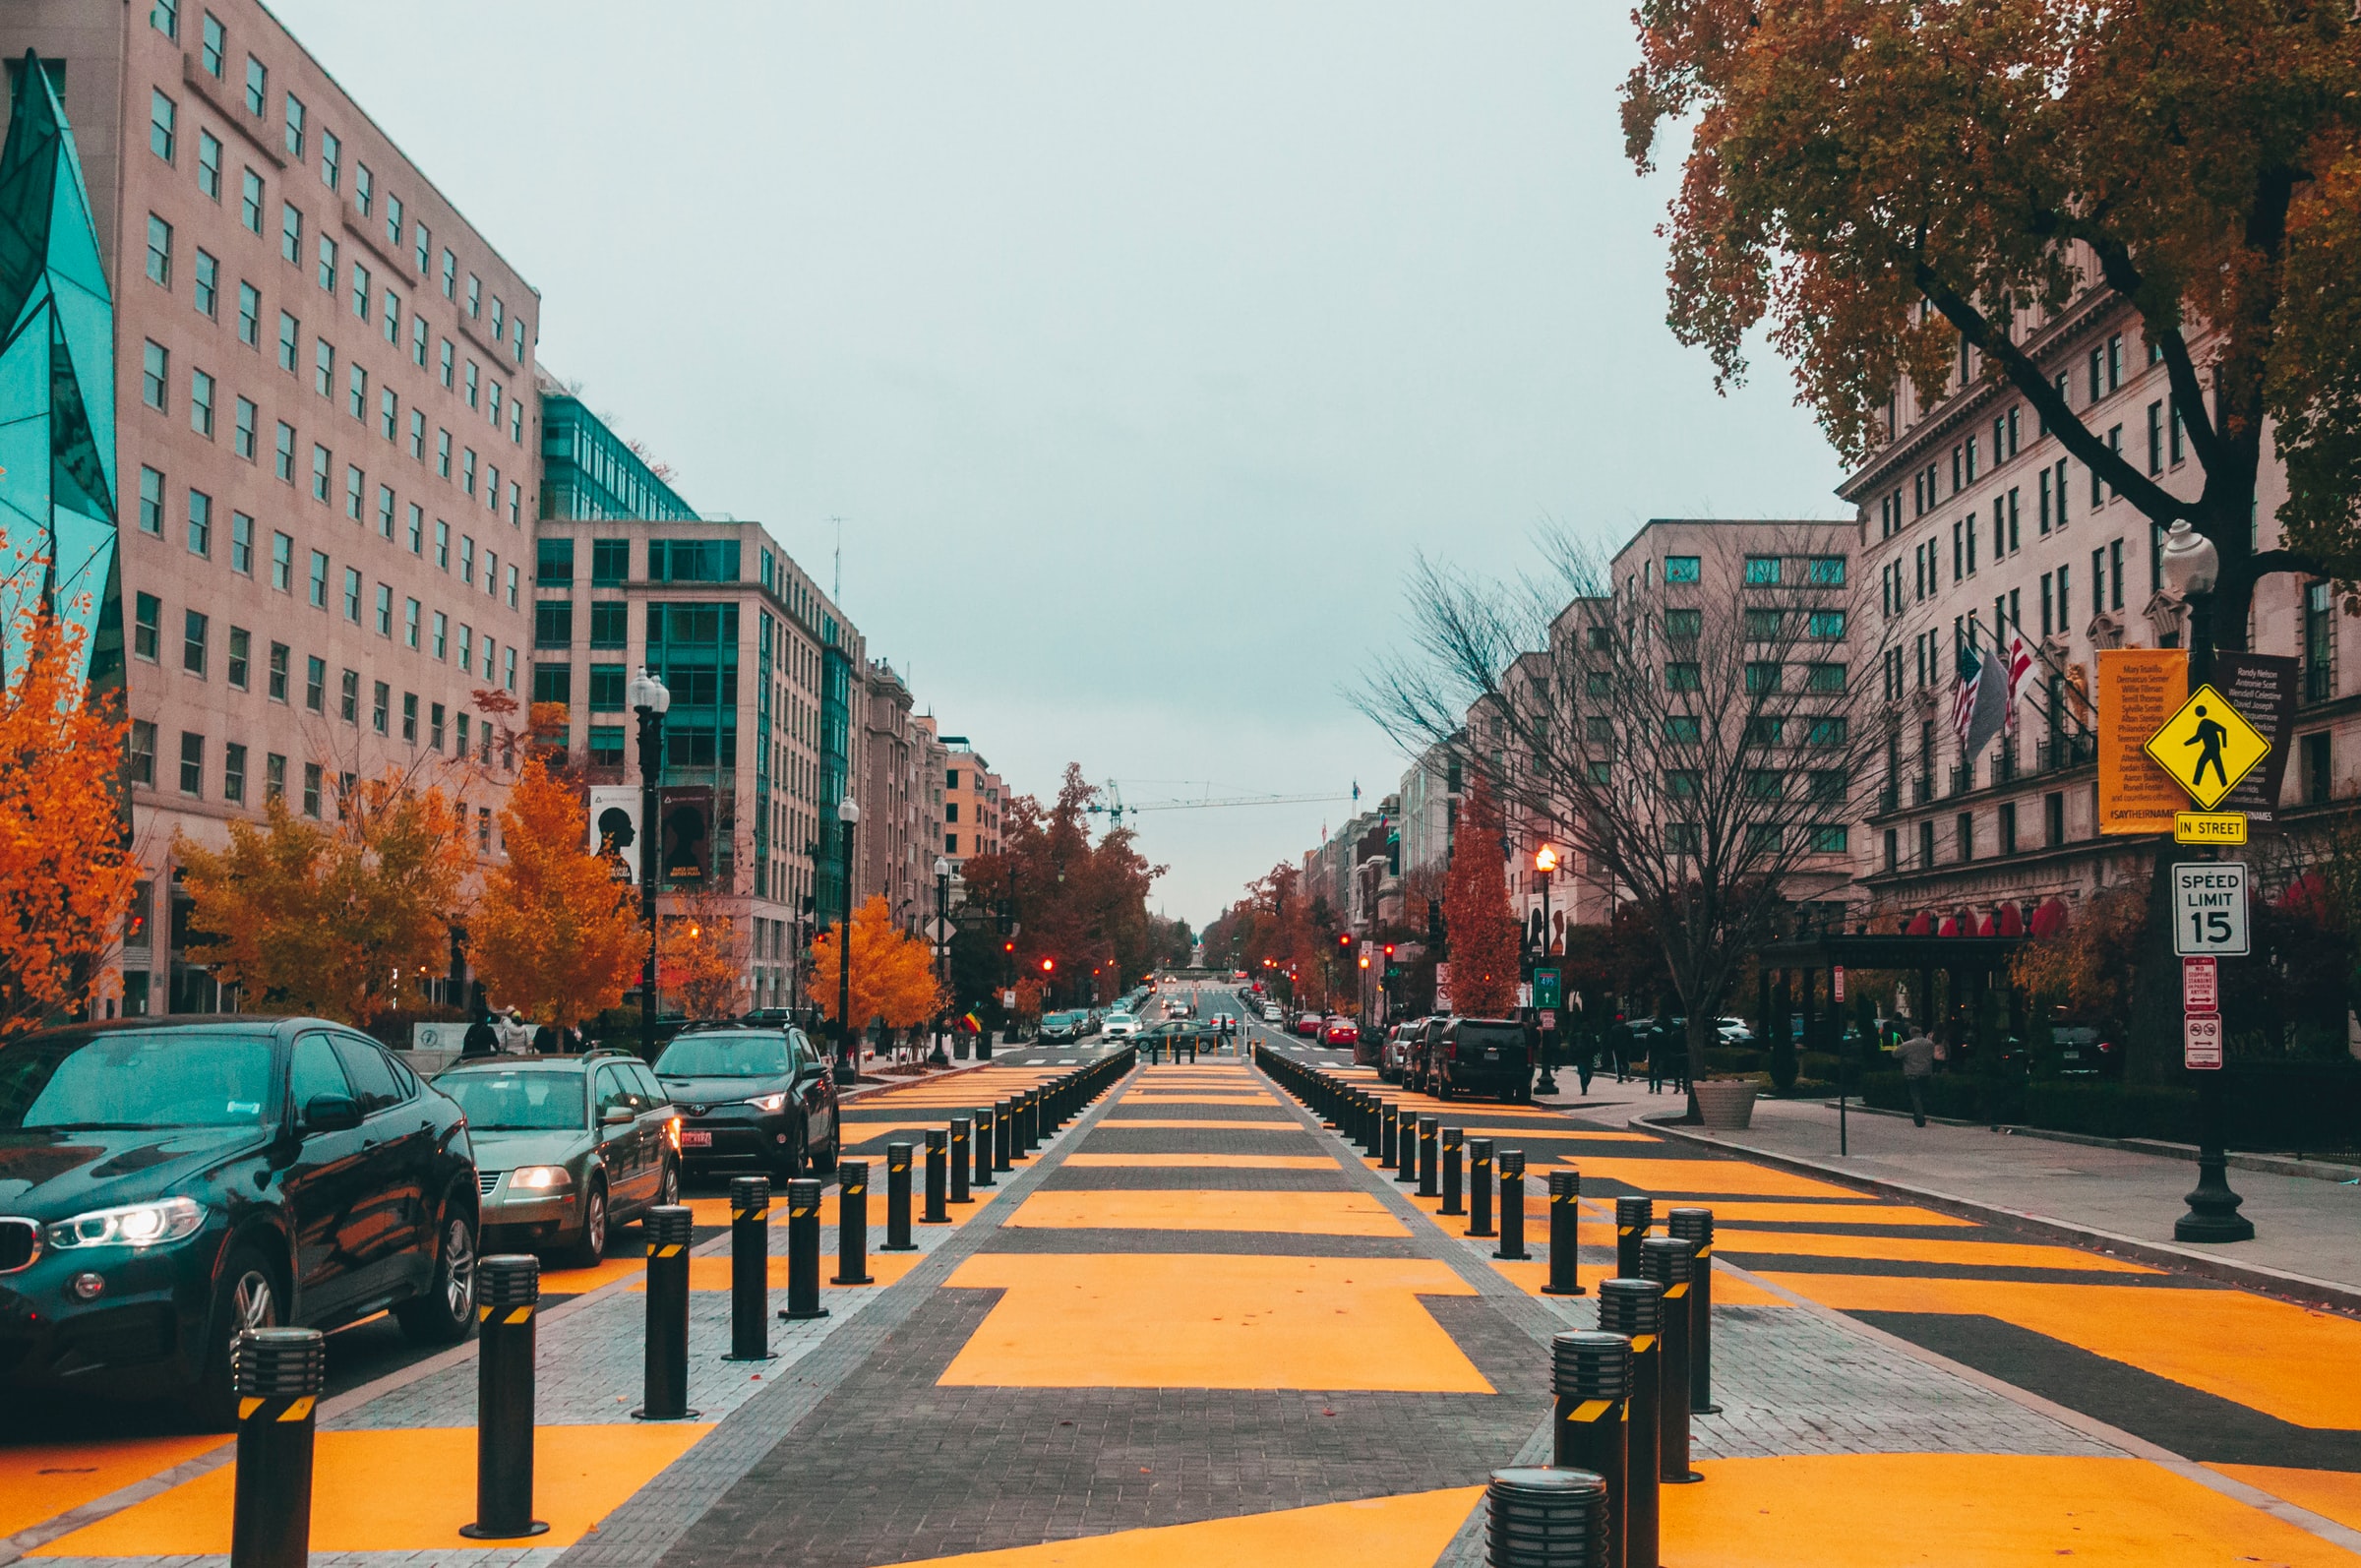 A “complete street” in Washington, D.C. with several community livability features for an urban setting such as wide sidewalks with tree coverage, traffic calming design, and a physically protected middle bike lane.  Photo by Maria Oswalt on Unsplash.